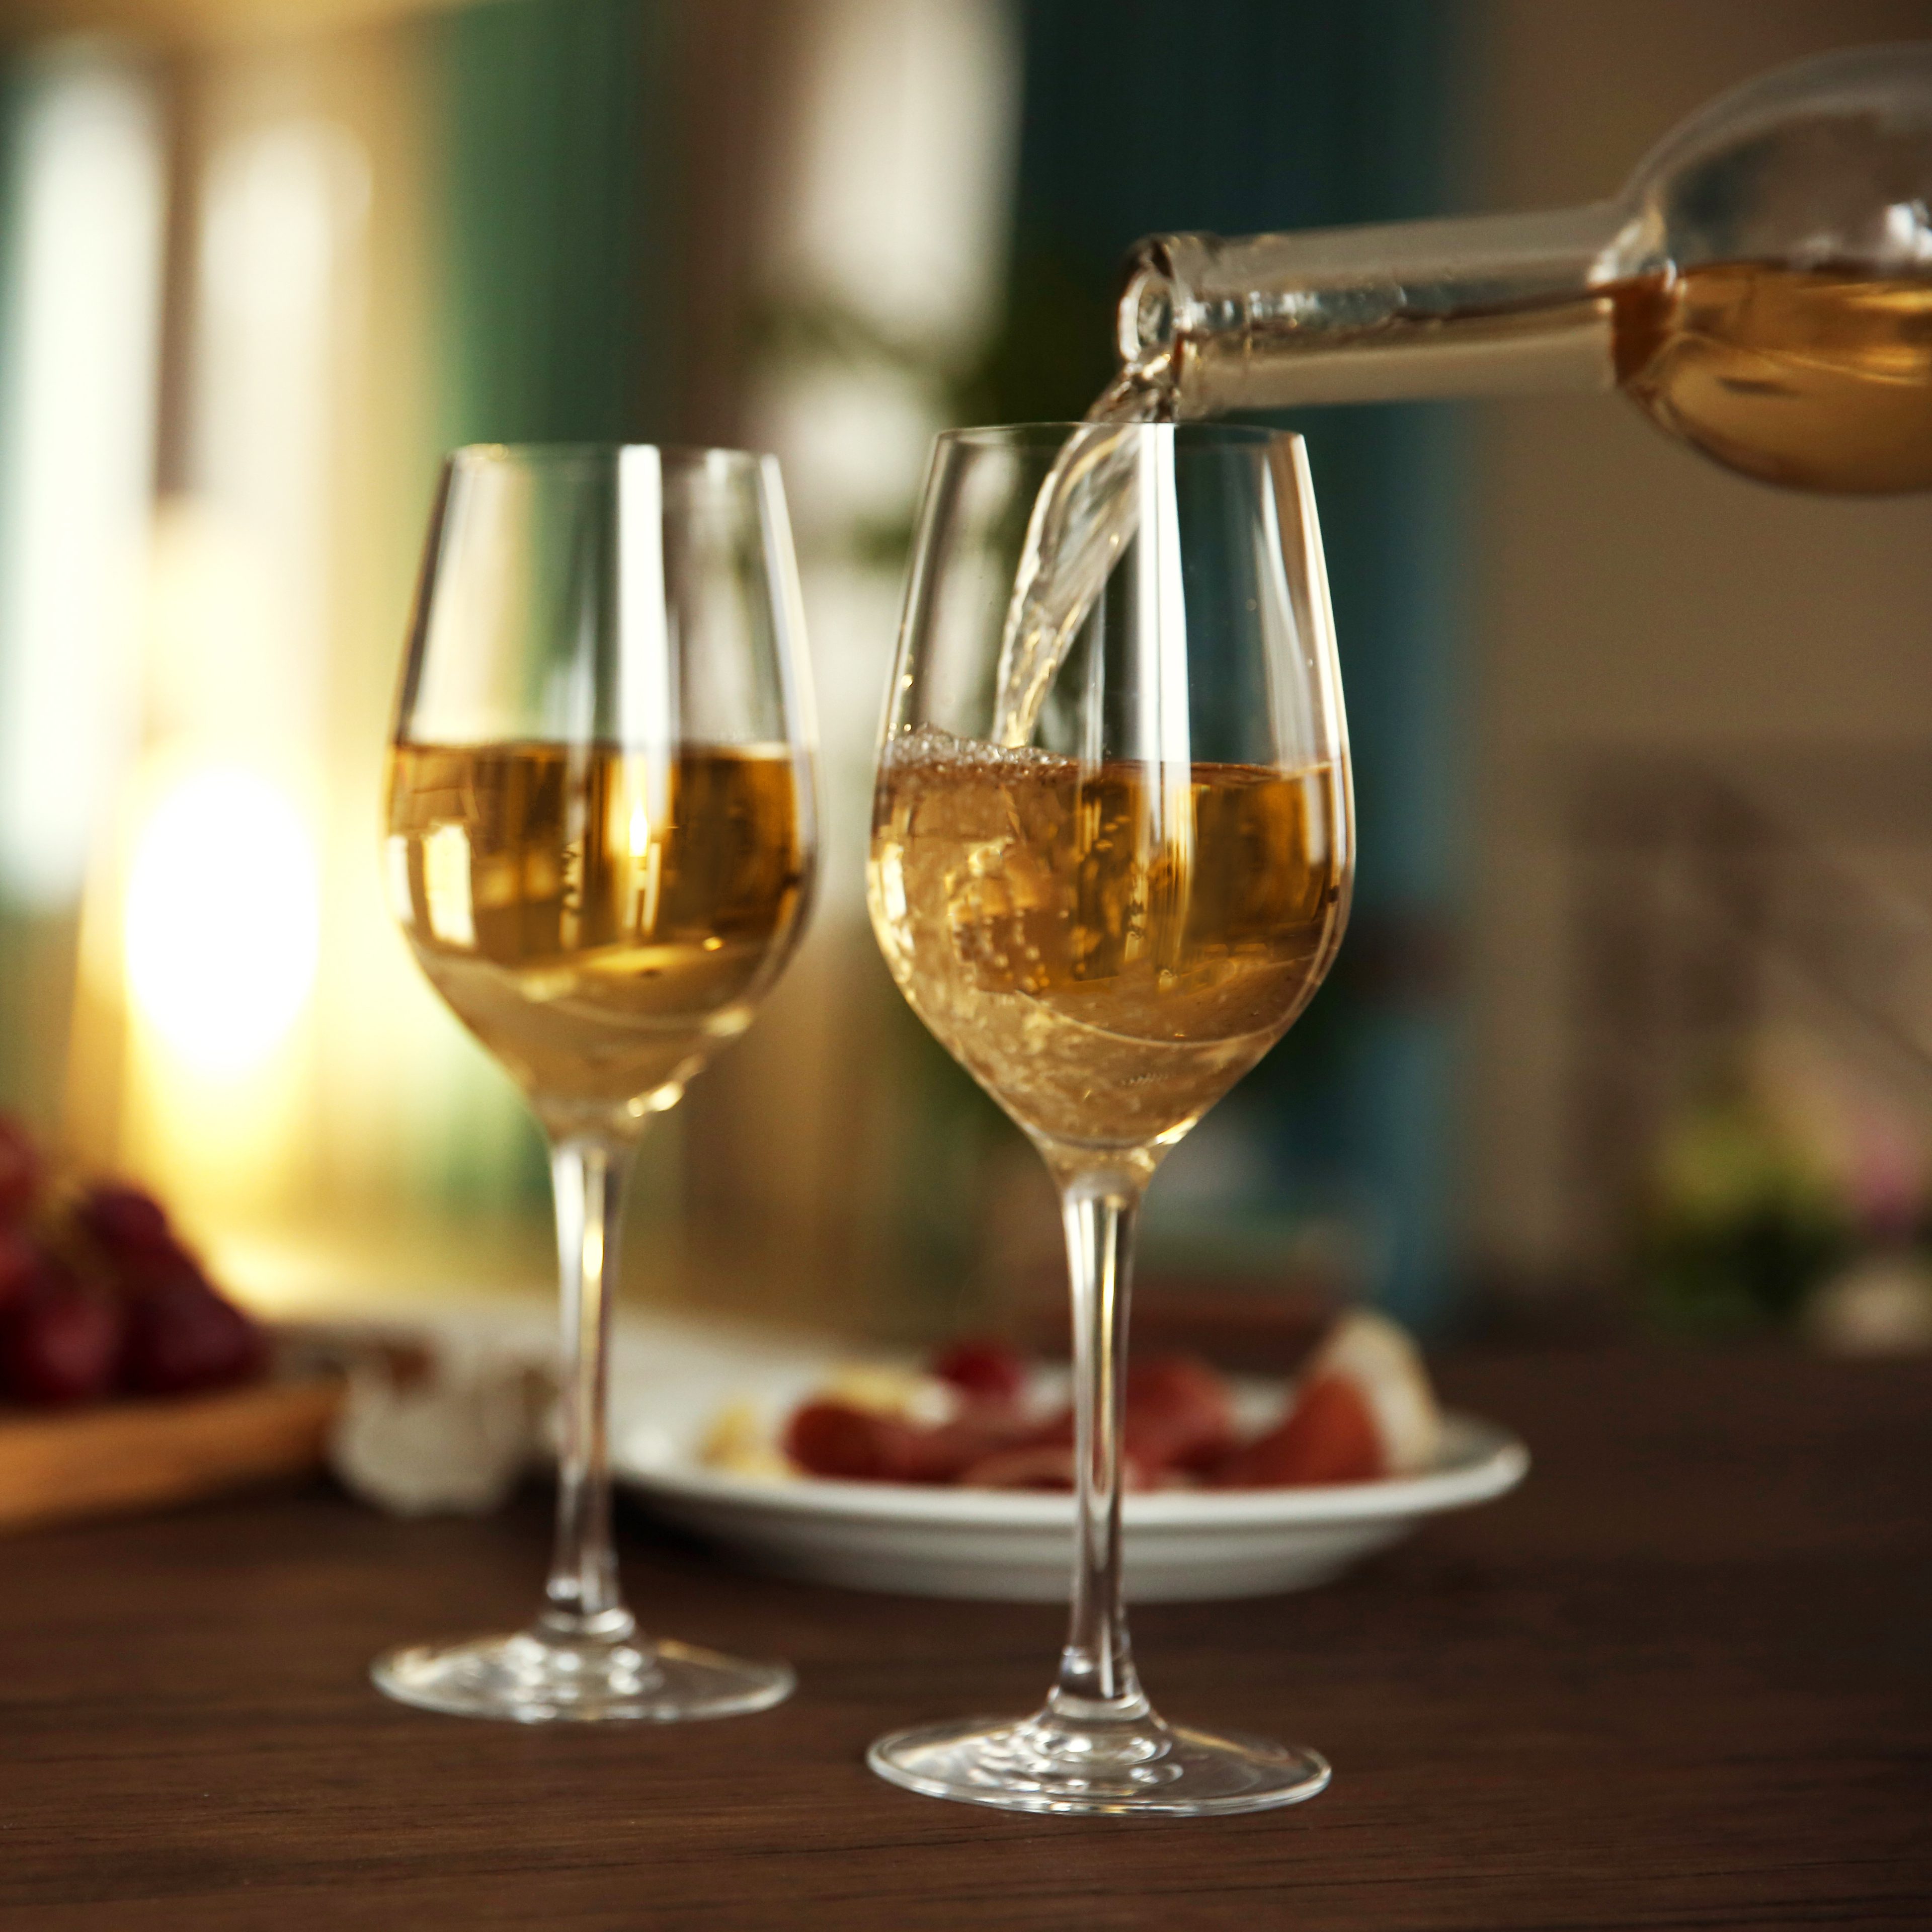 Pouring white wine from bottle into the wineglass on the table over blurred background